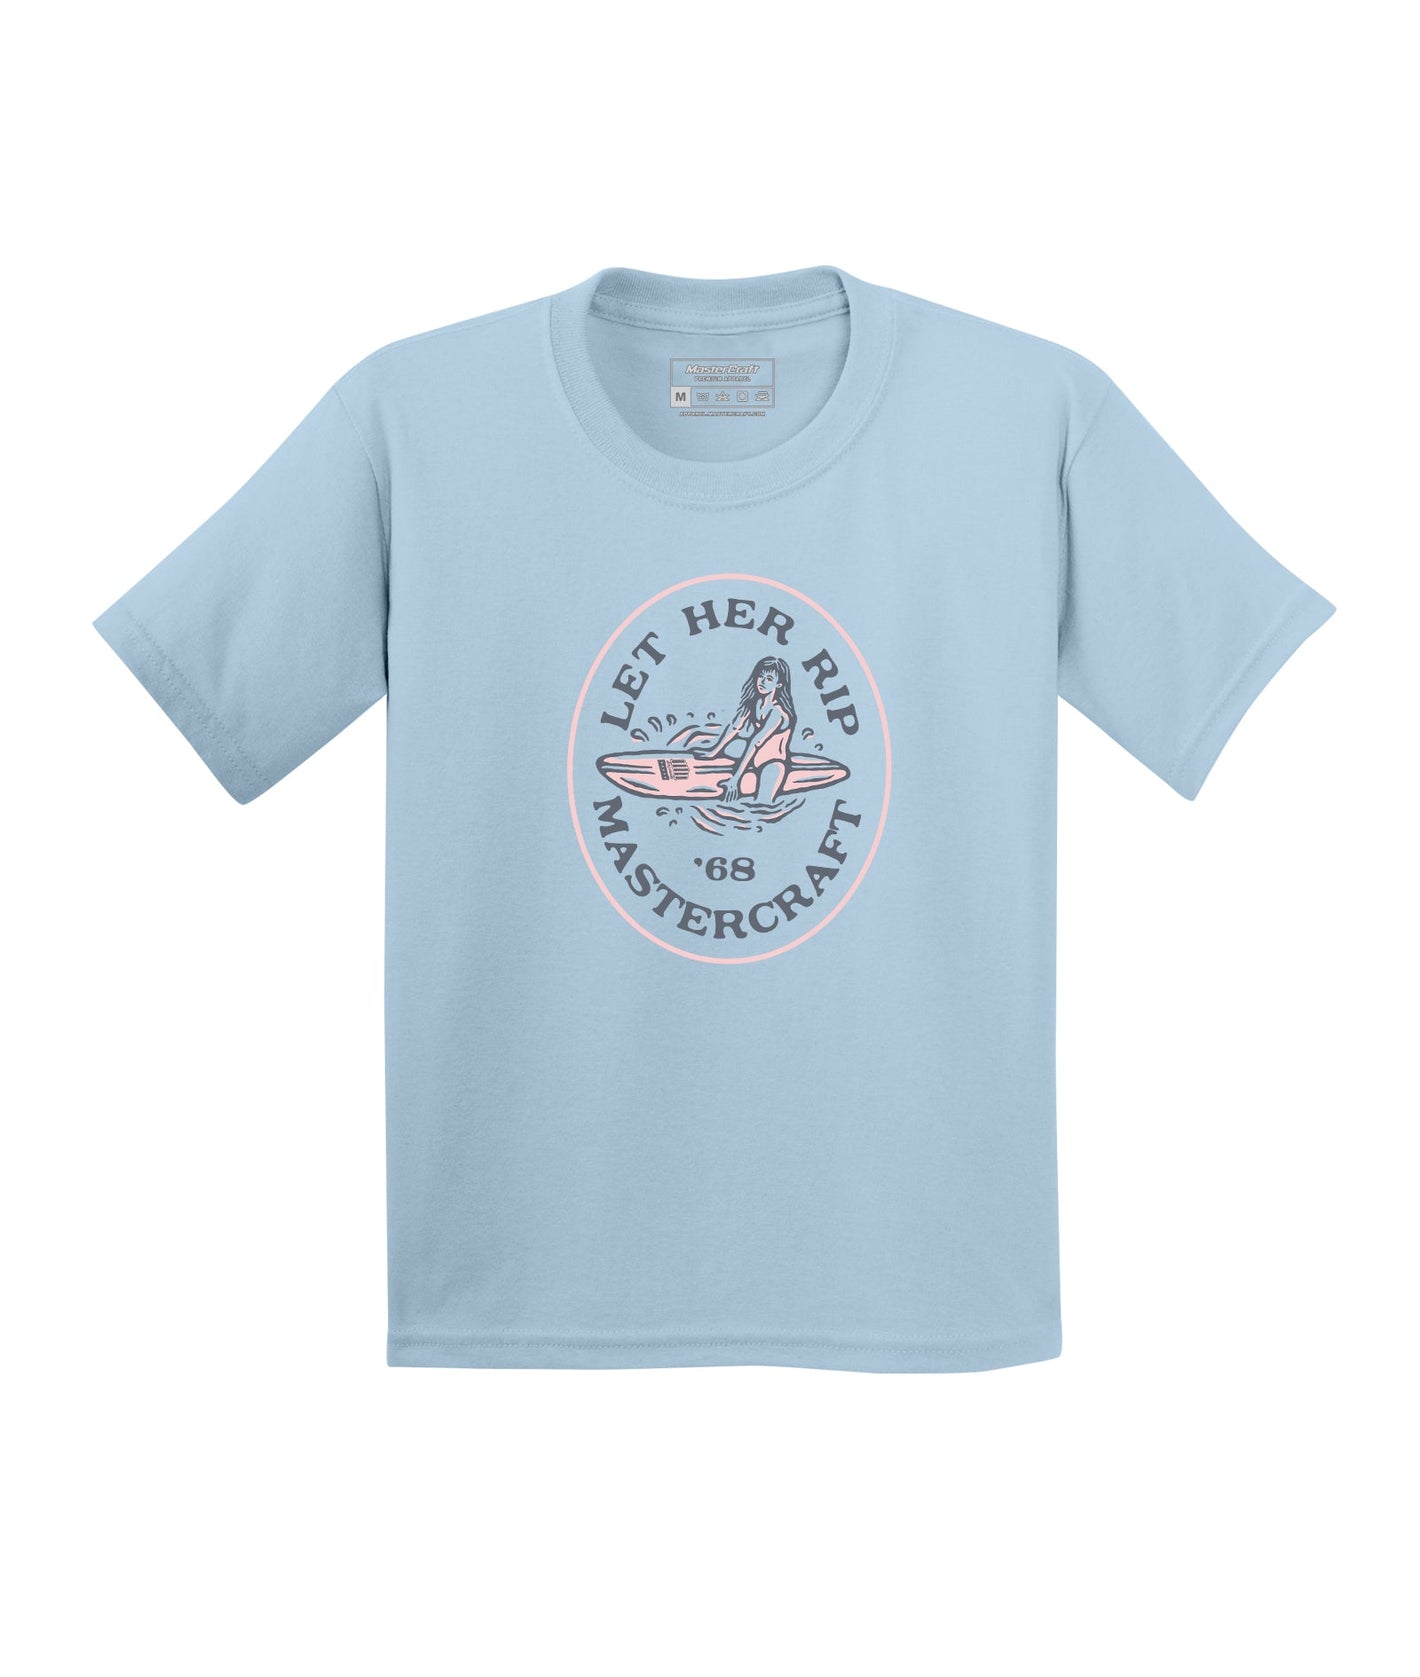 Let Her Rip - Lake Haven Youth T-Shirt